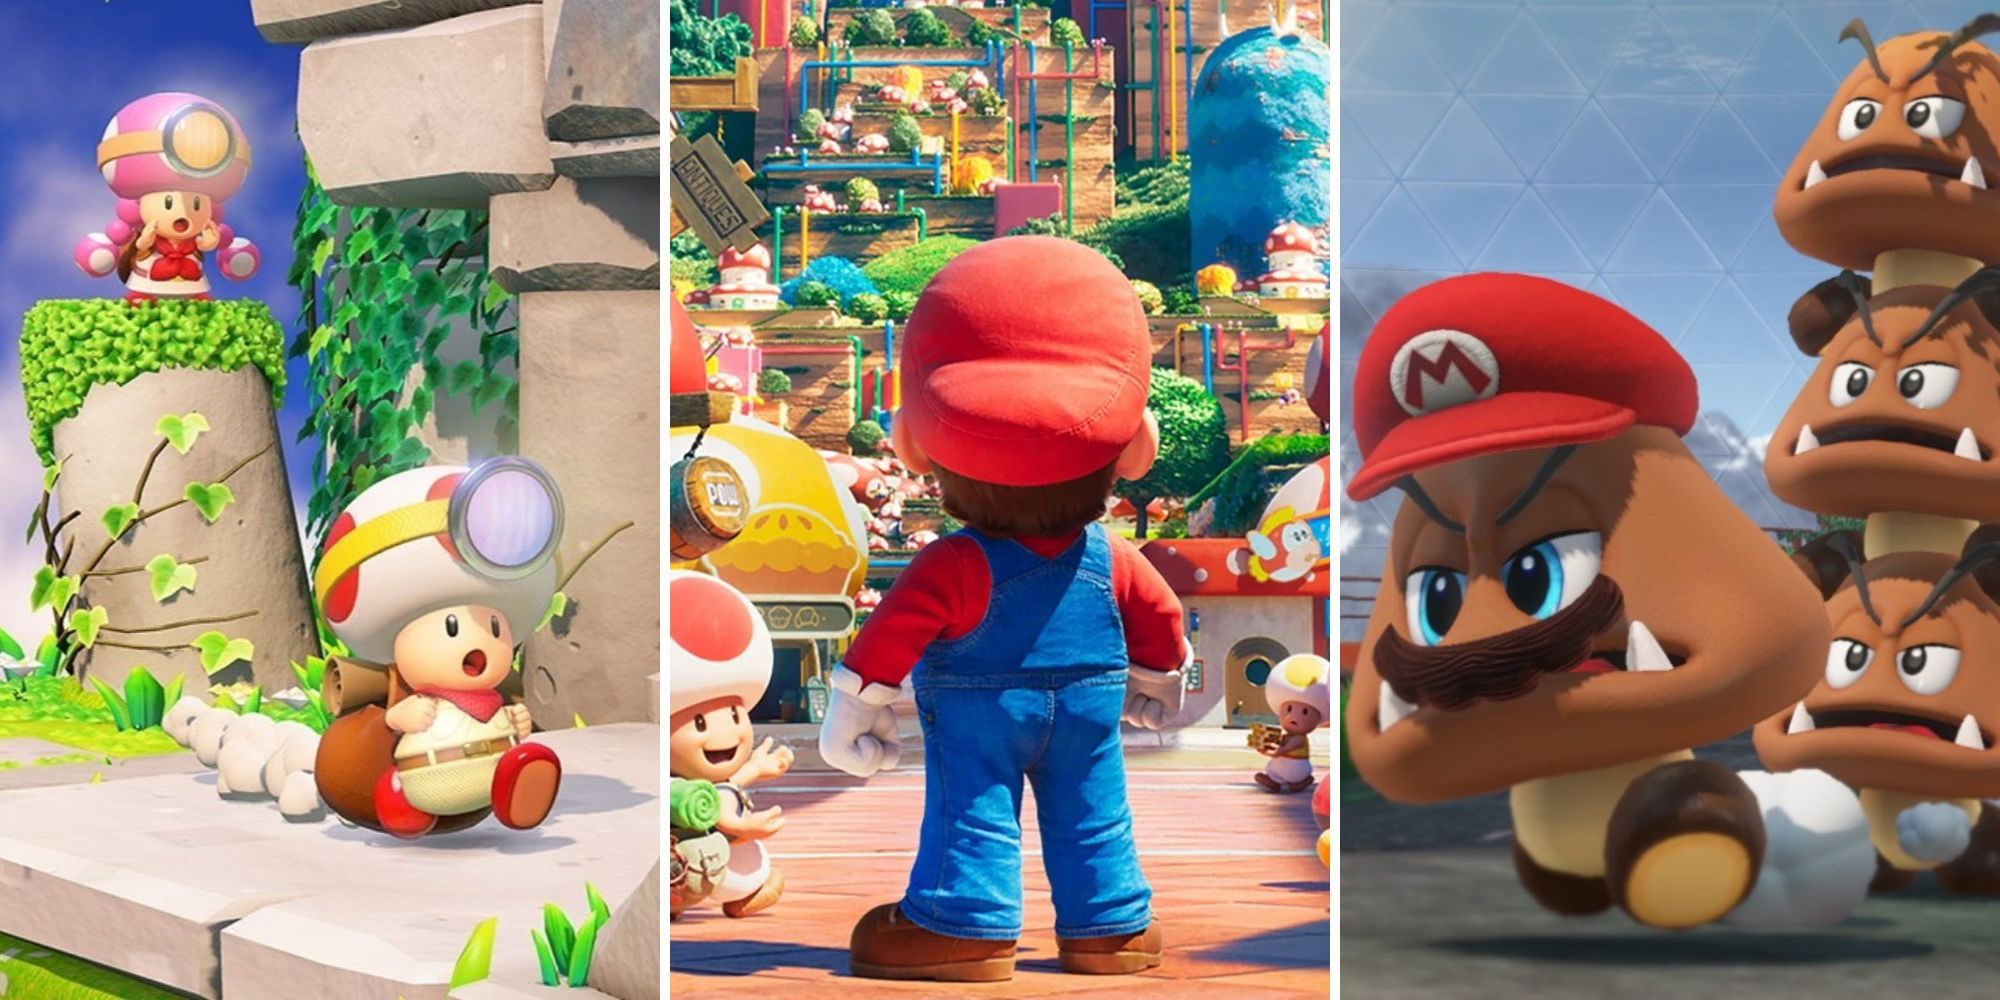 Toadette watches over Captain Toad, Mario looks up at the Mushroom Kingdom, Goomba Mario runs away from a stack of Goombas in The Super Mario Bros. Movie